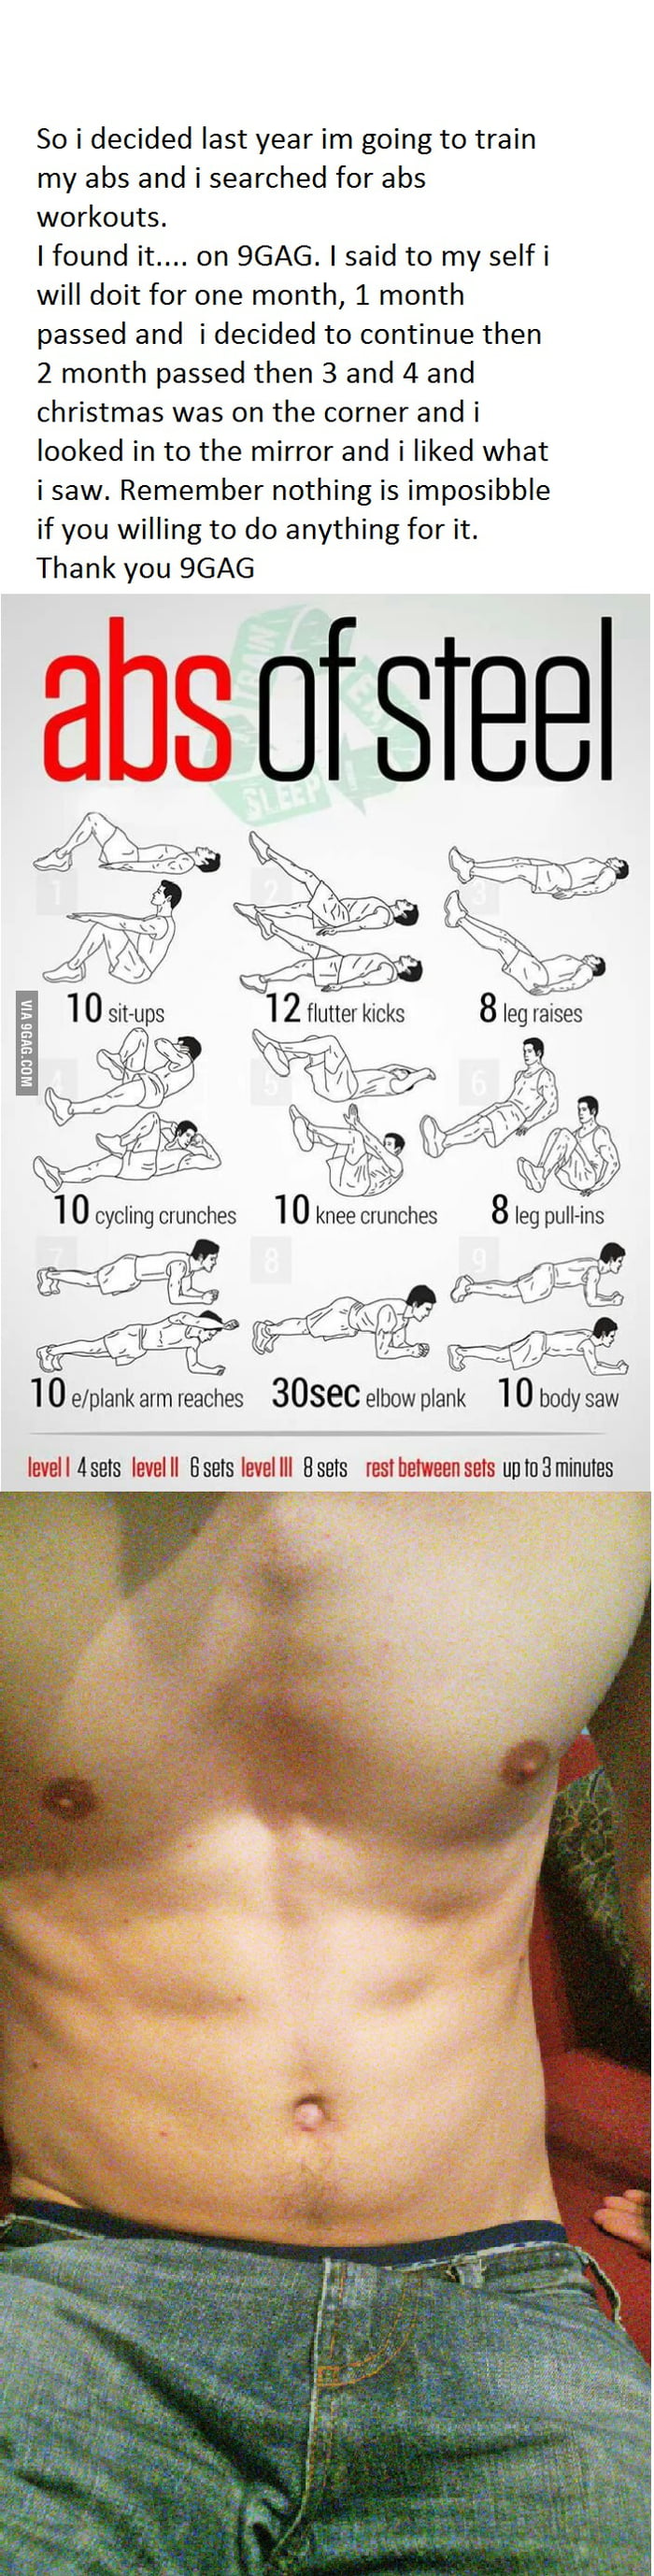 I Found And Abs Workout On 9gag Last Year Here Is My Result